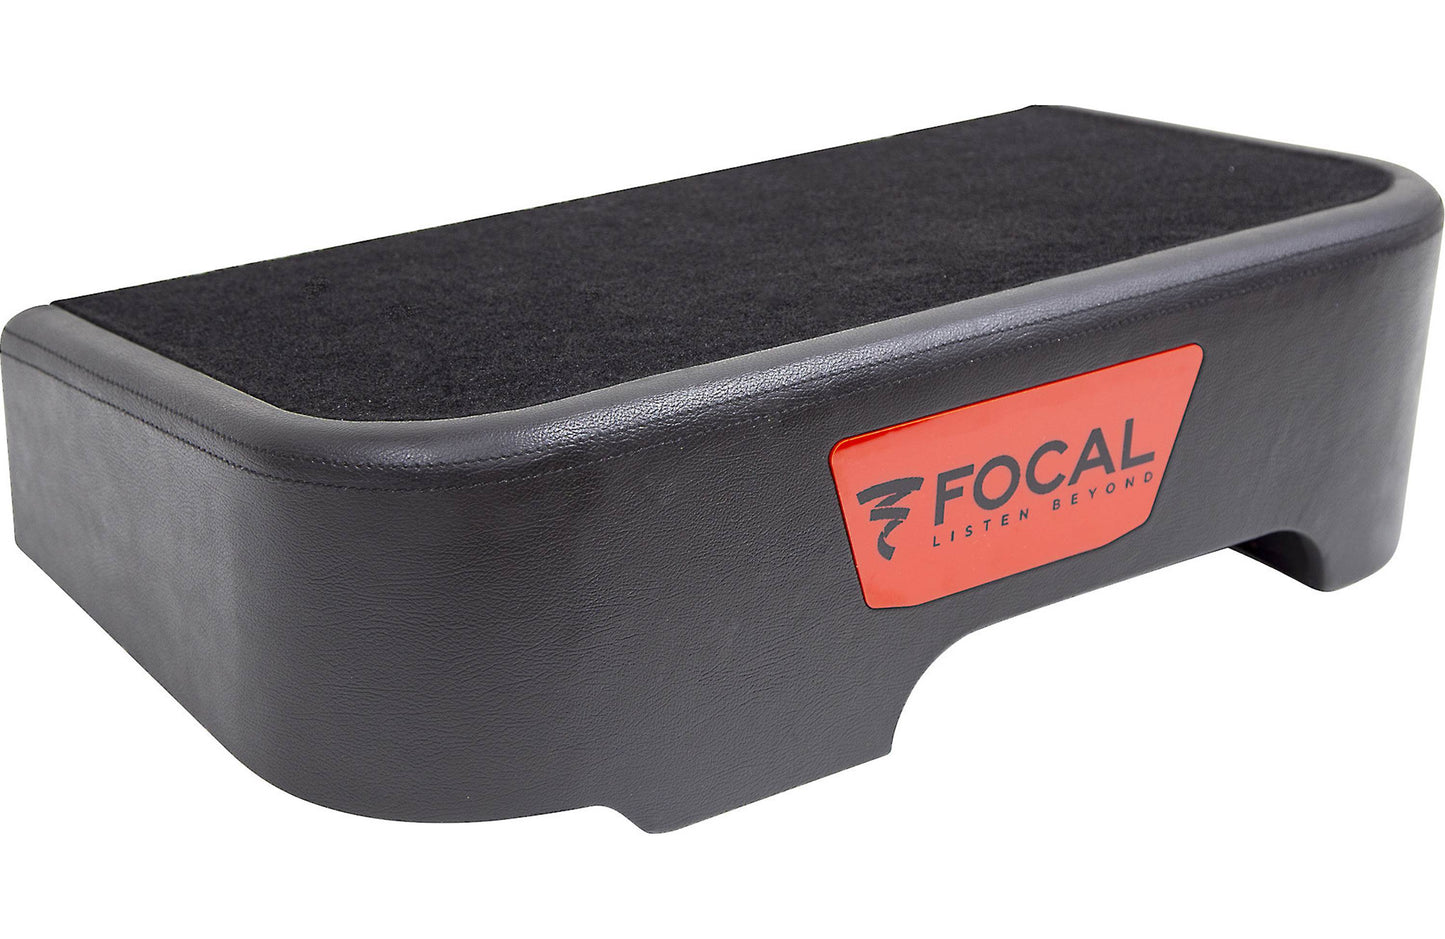 Focal Flax Chevy Single 10 Expert Series subwoofer enclosure — fits select 2007-up Chevrolet and GMC Crew Cab trucks